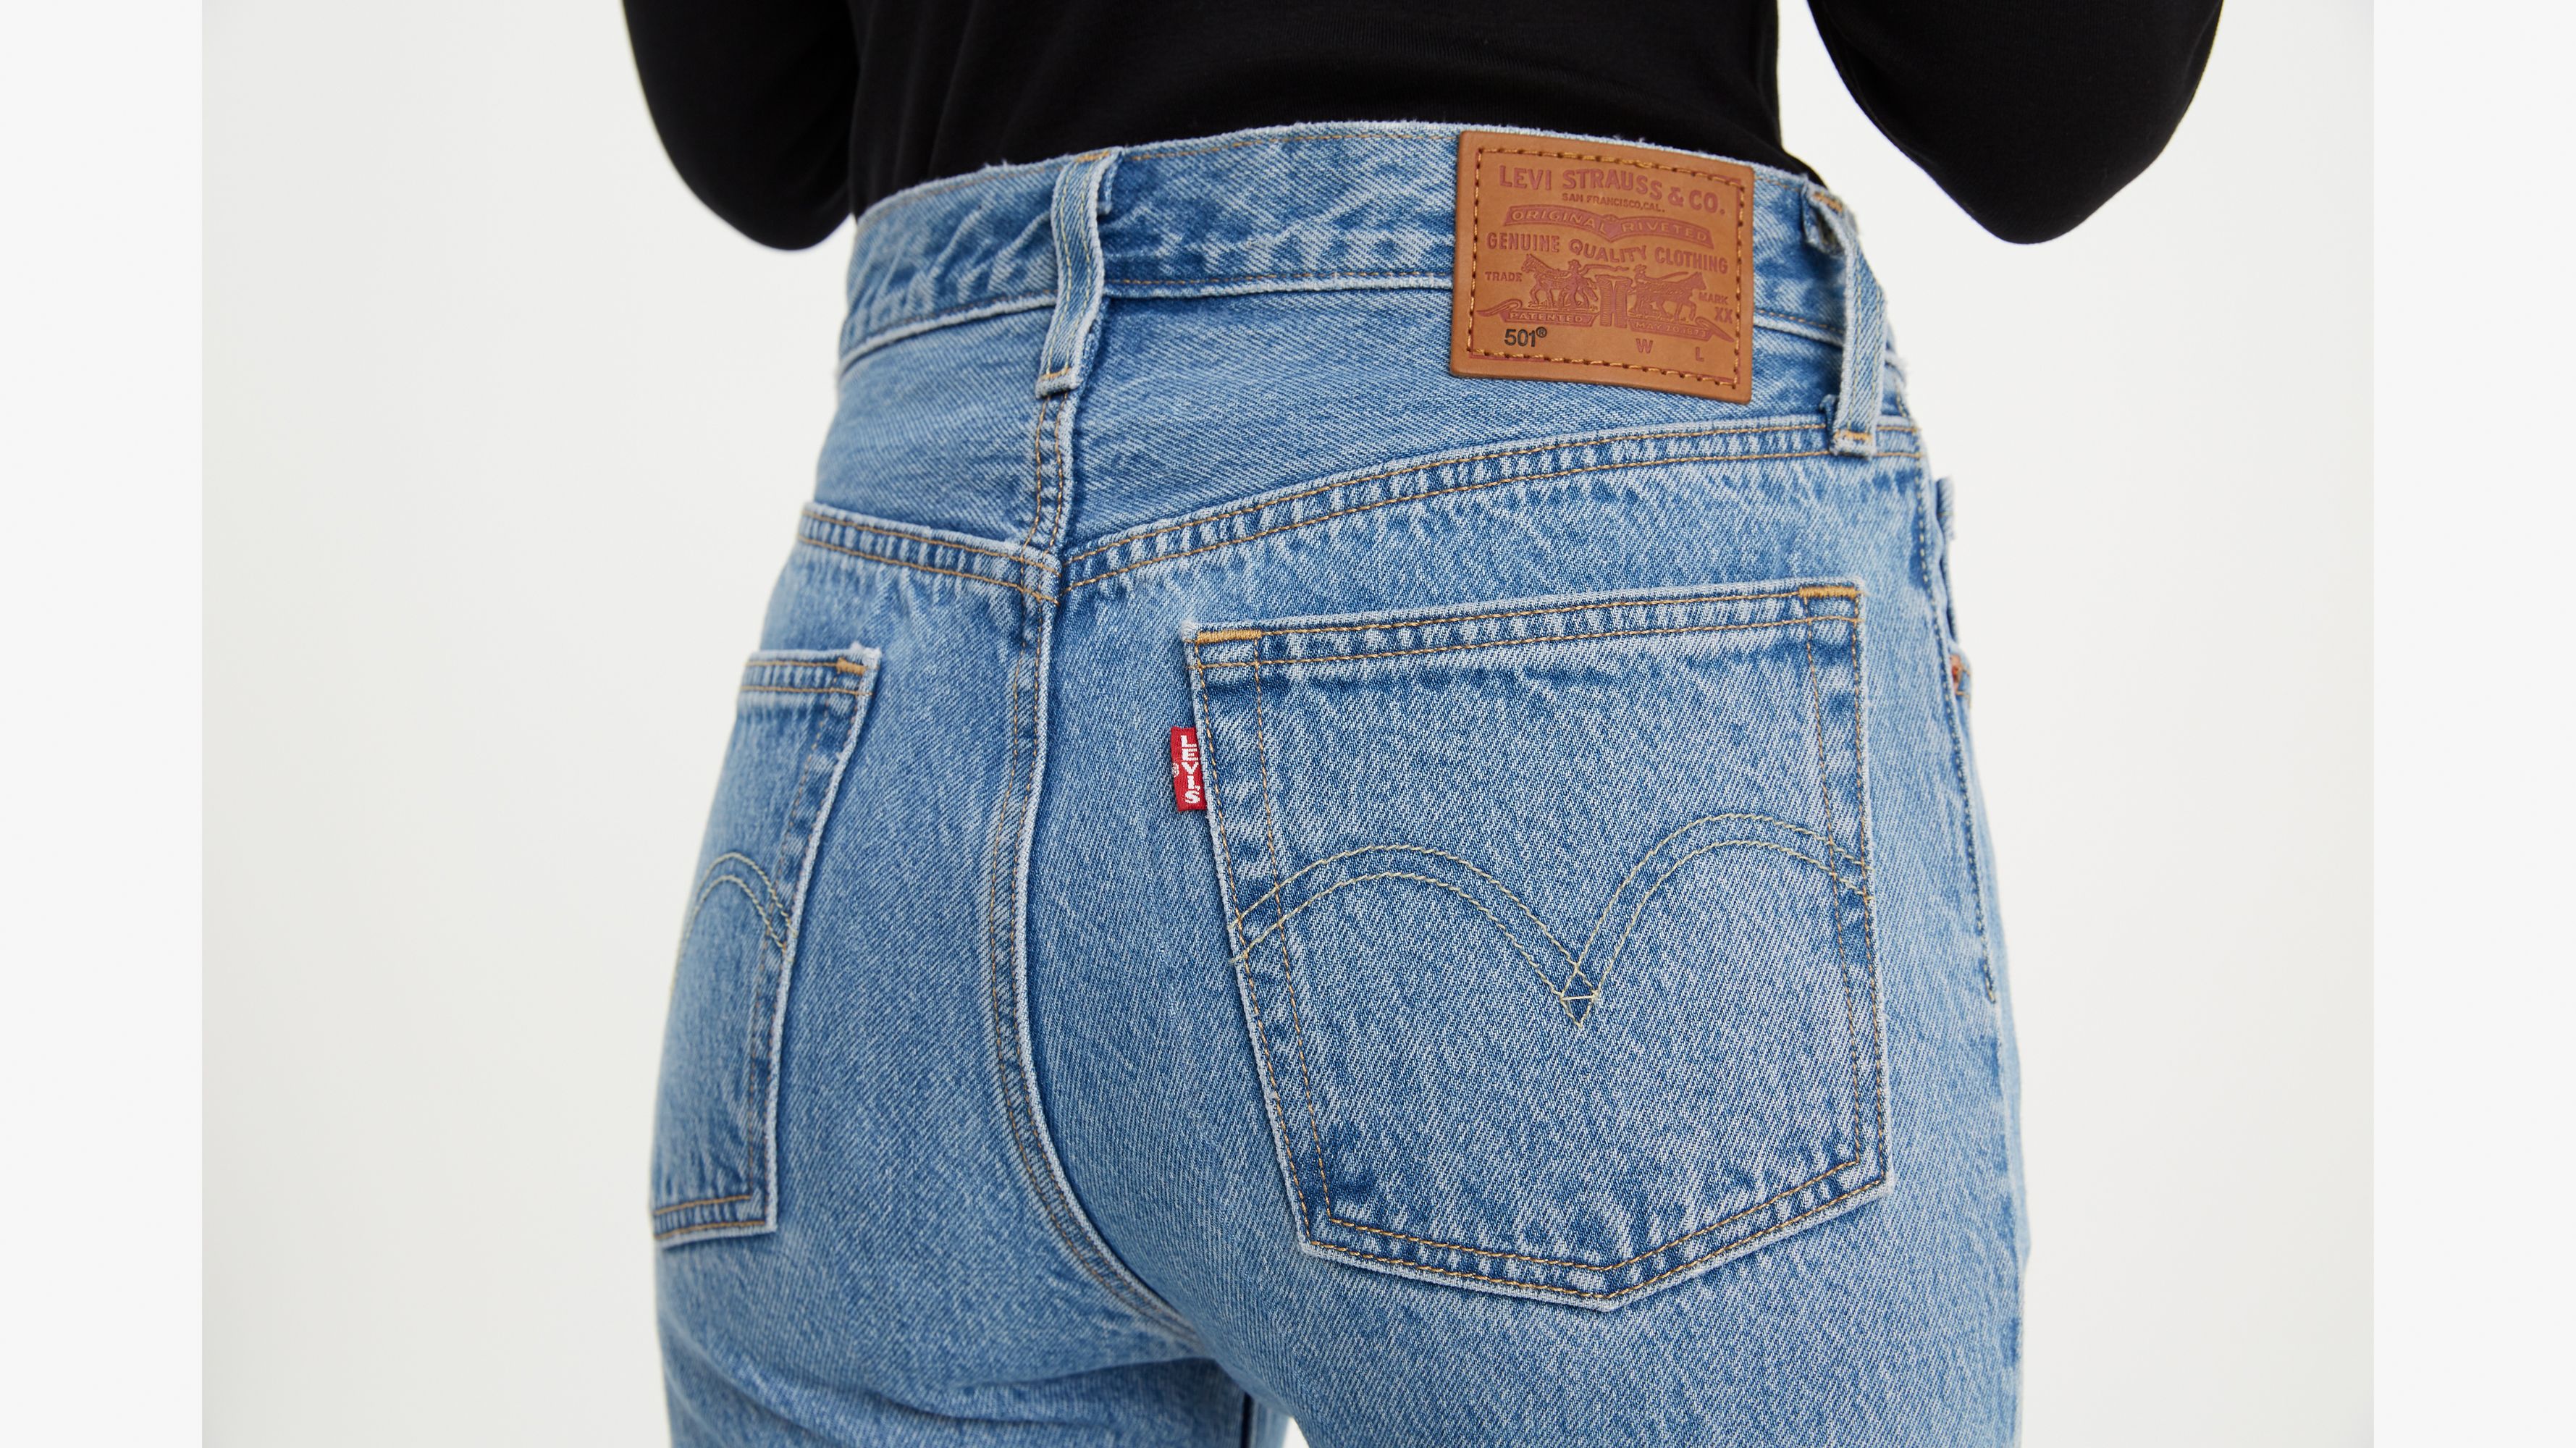 How To Rip Jeans According To The VP Of Women's Design At Levi's